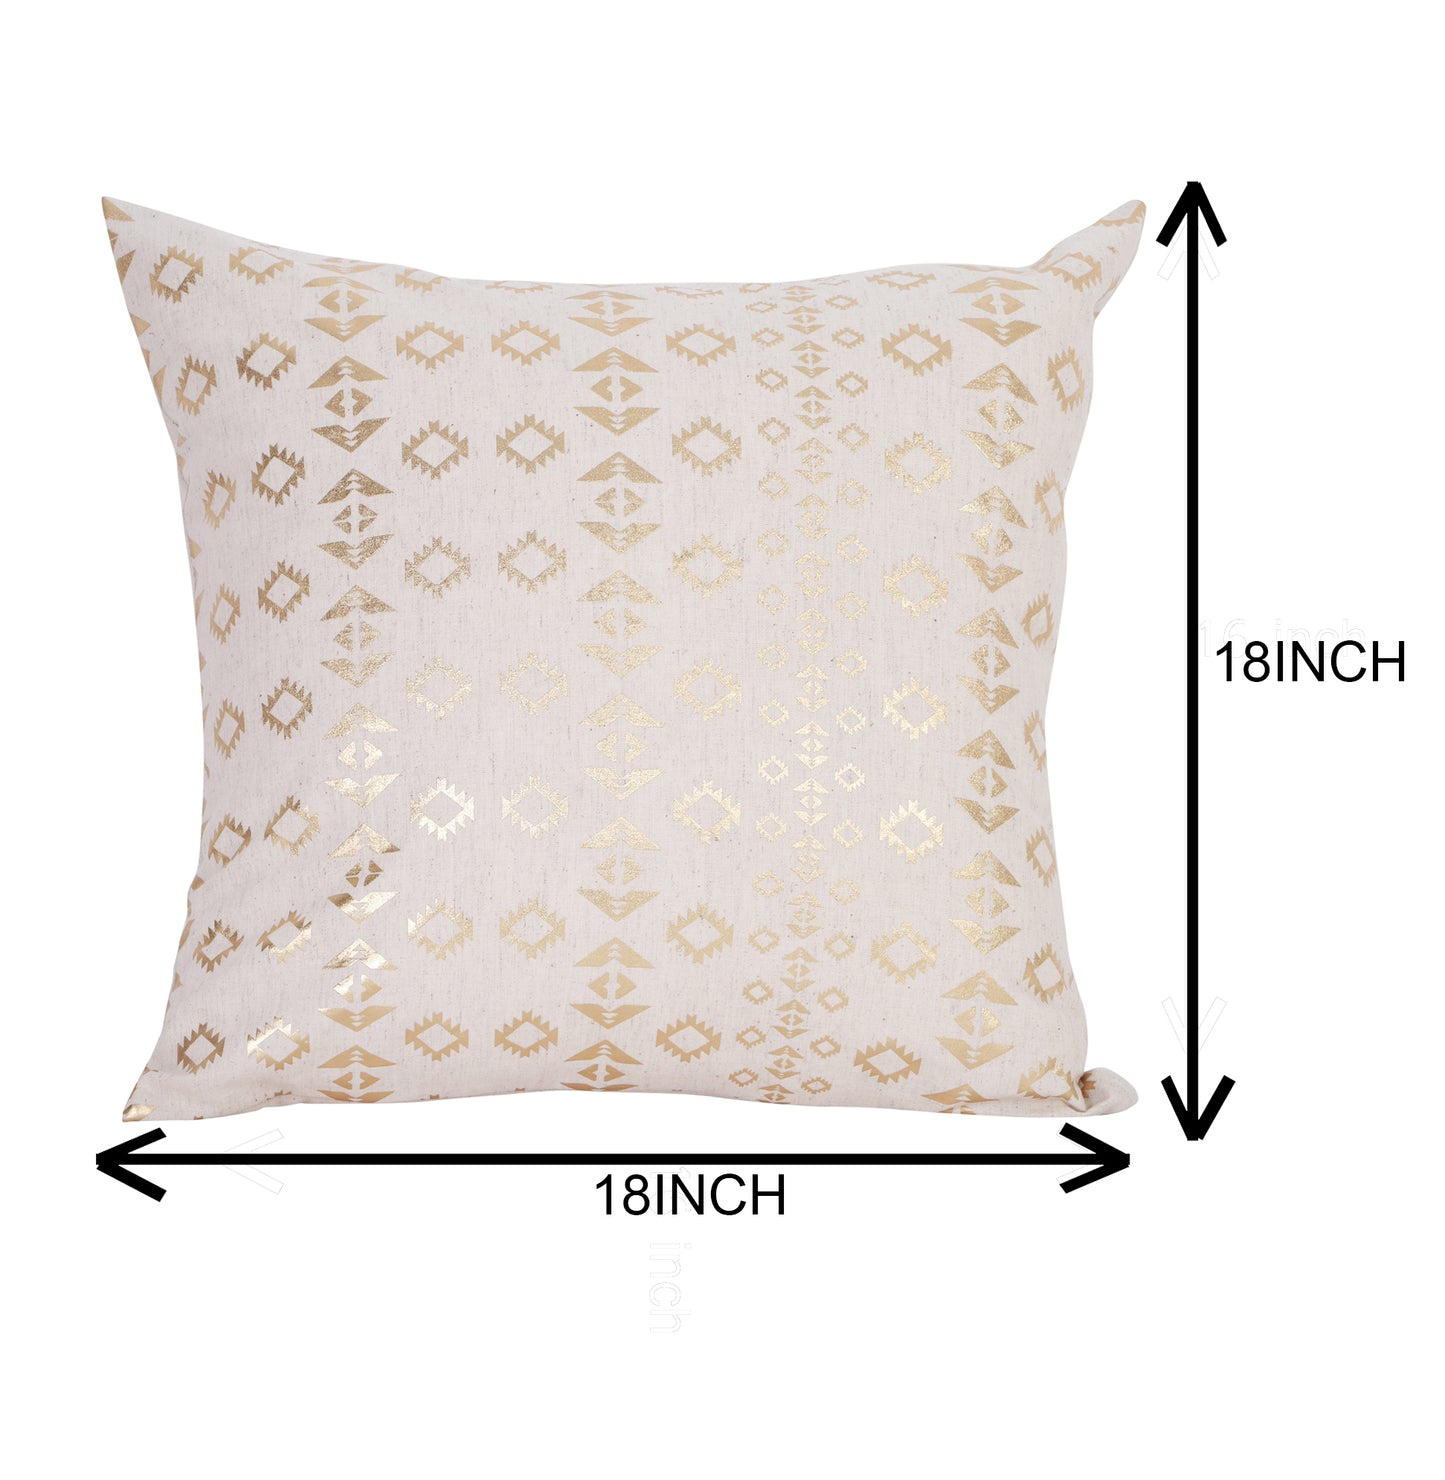 NUEVOSGHAR Cotton Printed Cushion Cover | Square Cushion Cover for Bedding/Sofa/Couch | Home Decorative Cushion Covers | Pack of 1 Piece | 18x18 Inch_Beige